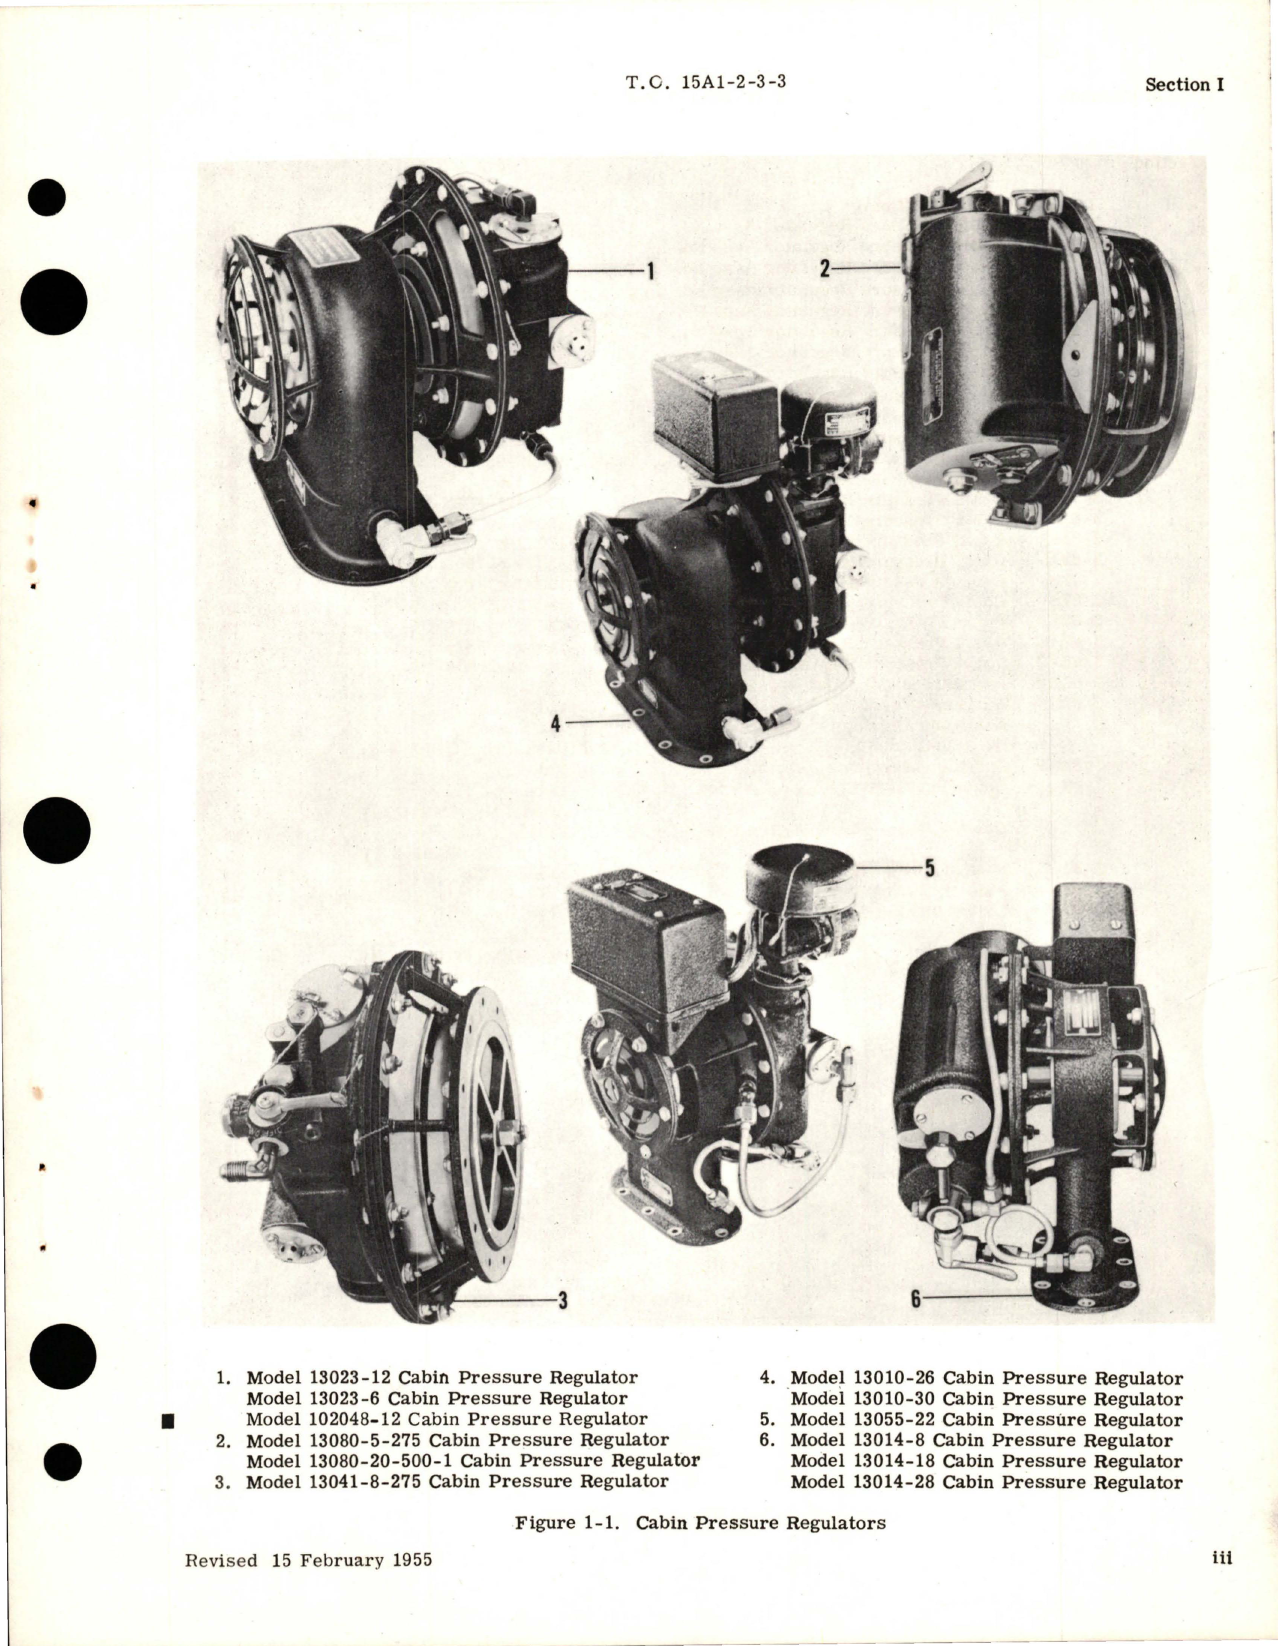 Sample page 5 from AirCorps Library document: Overhaul Instructions for Cabin Pressure Regulators